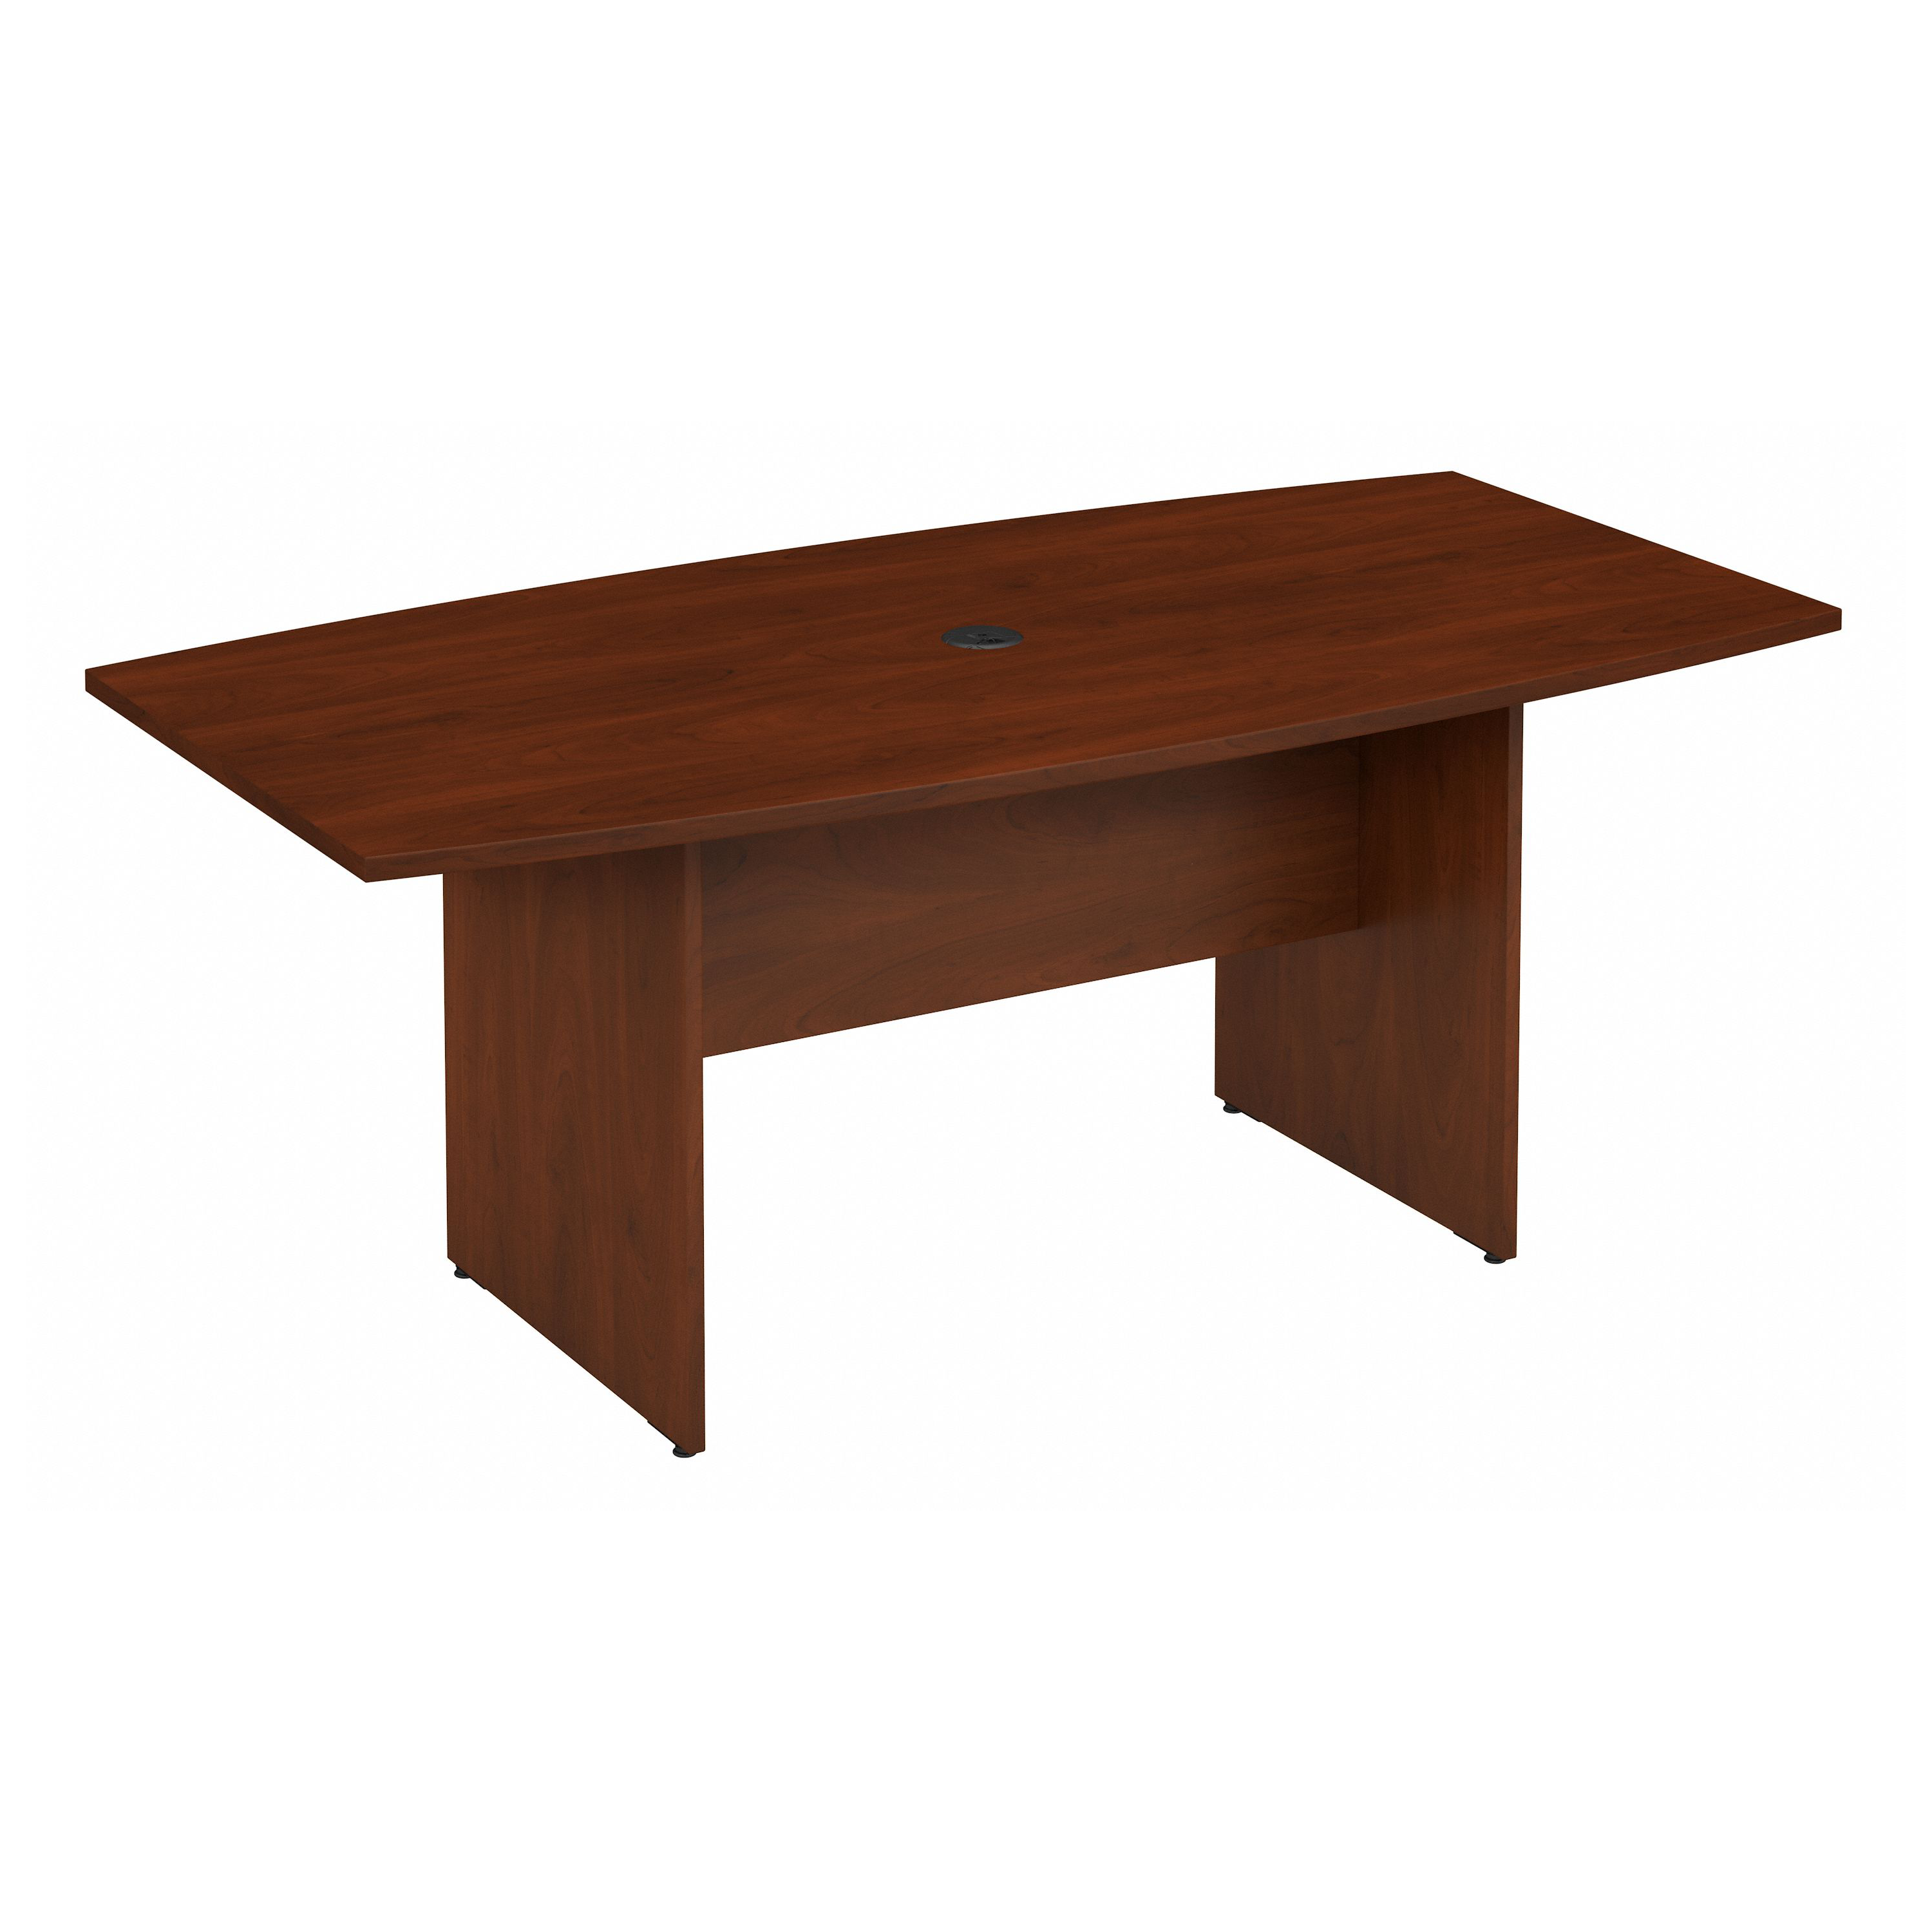 Shop Bush Business Furniture 72W x 36D Boat Shaped Conference Table with Wood Base 02 99TB7236HC #color_hansen cherry